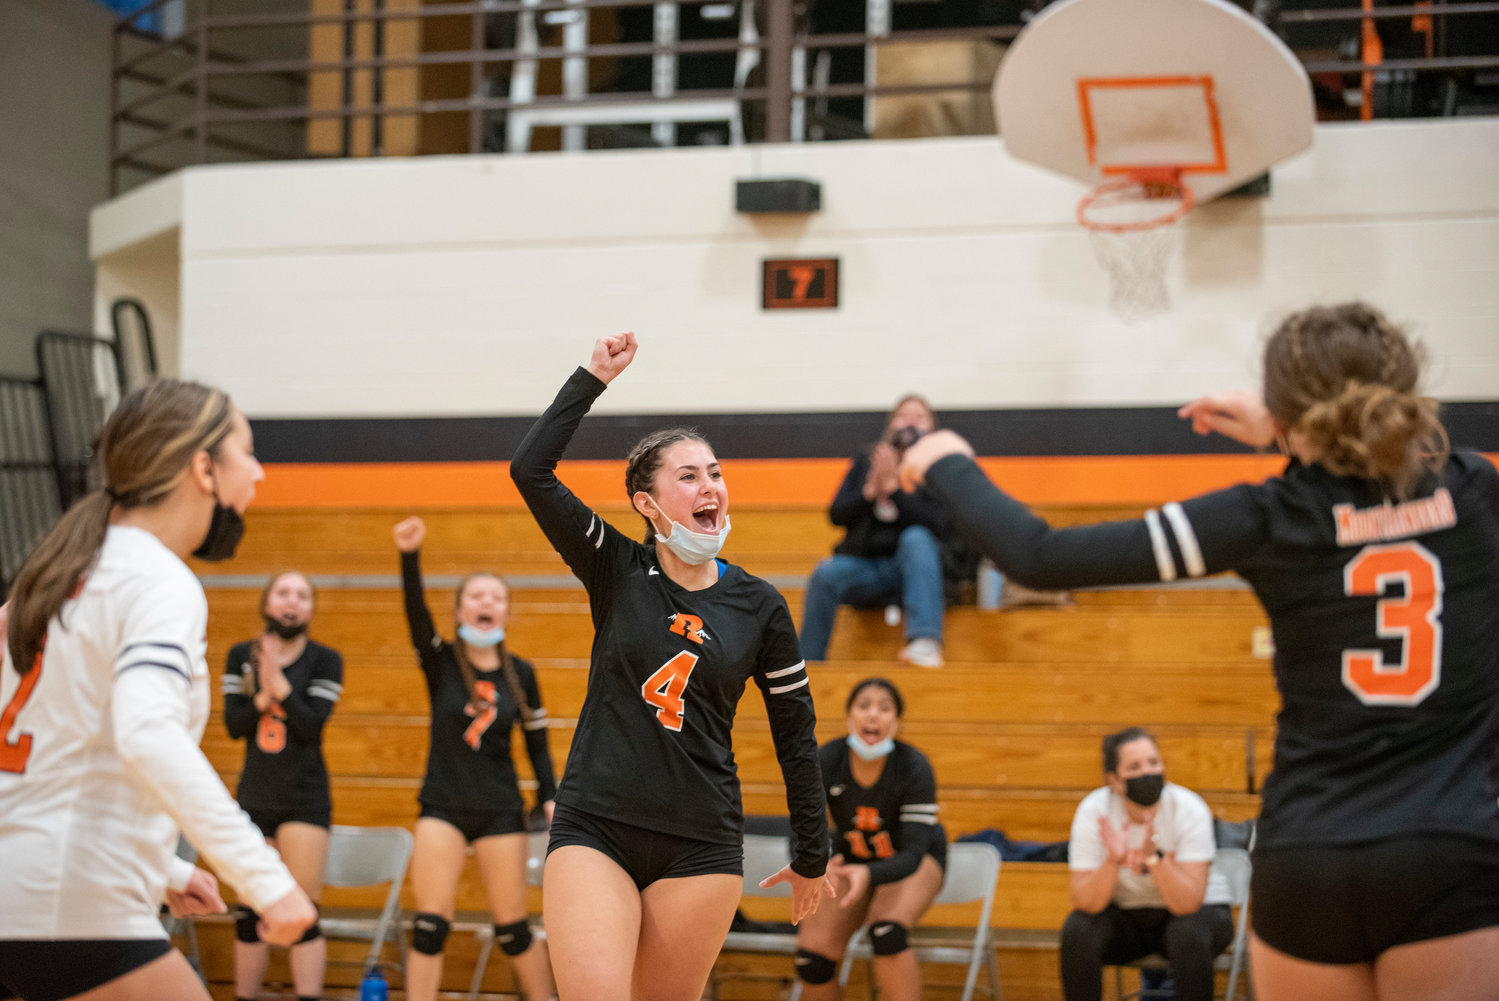 Rainier's Natasha Wood (4) yells in celebration after the Mountaineers score a point against Forks in the district playoffs Wednesday.